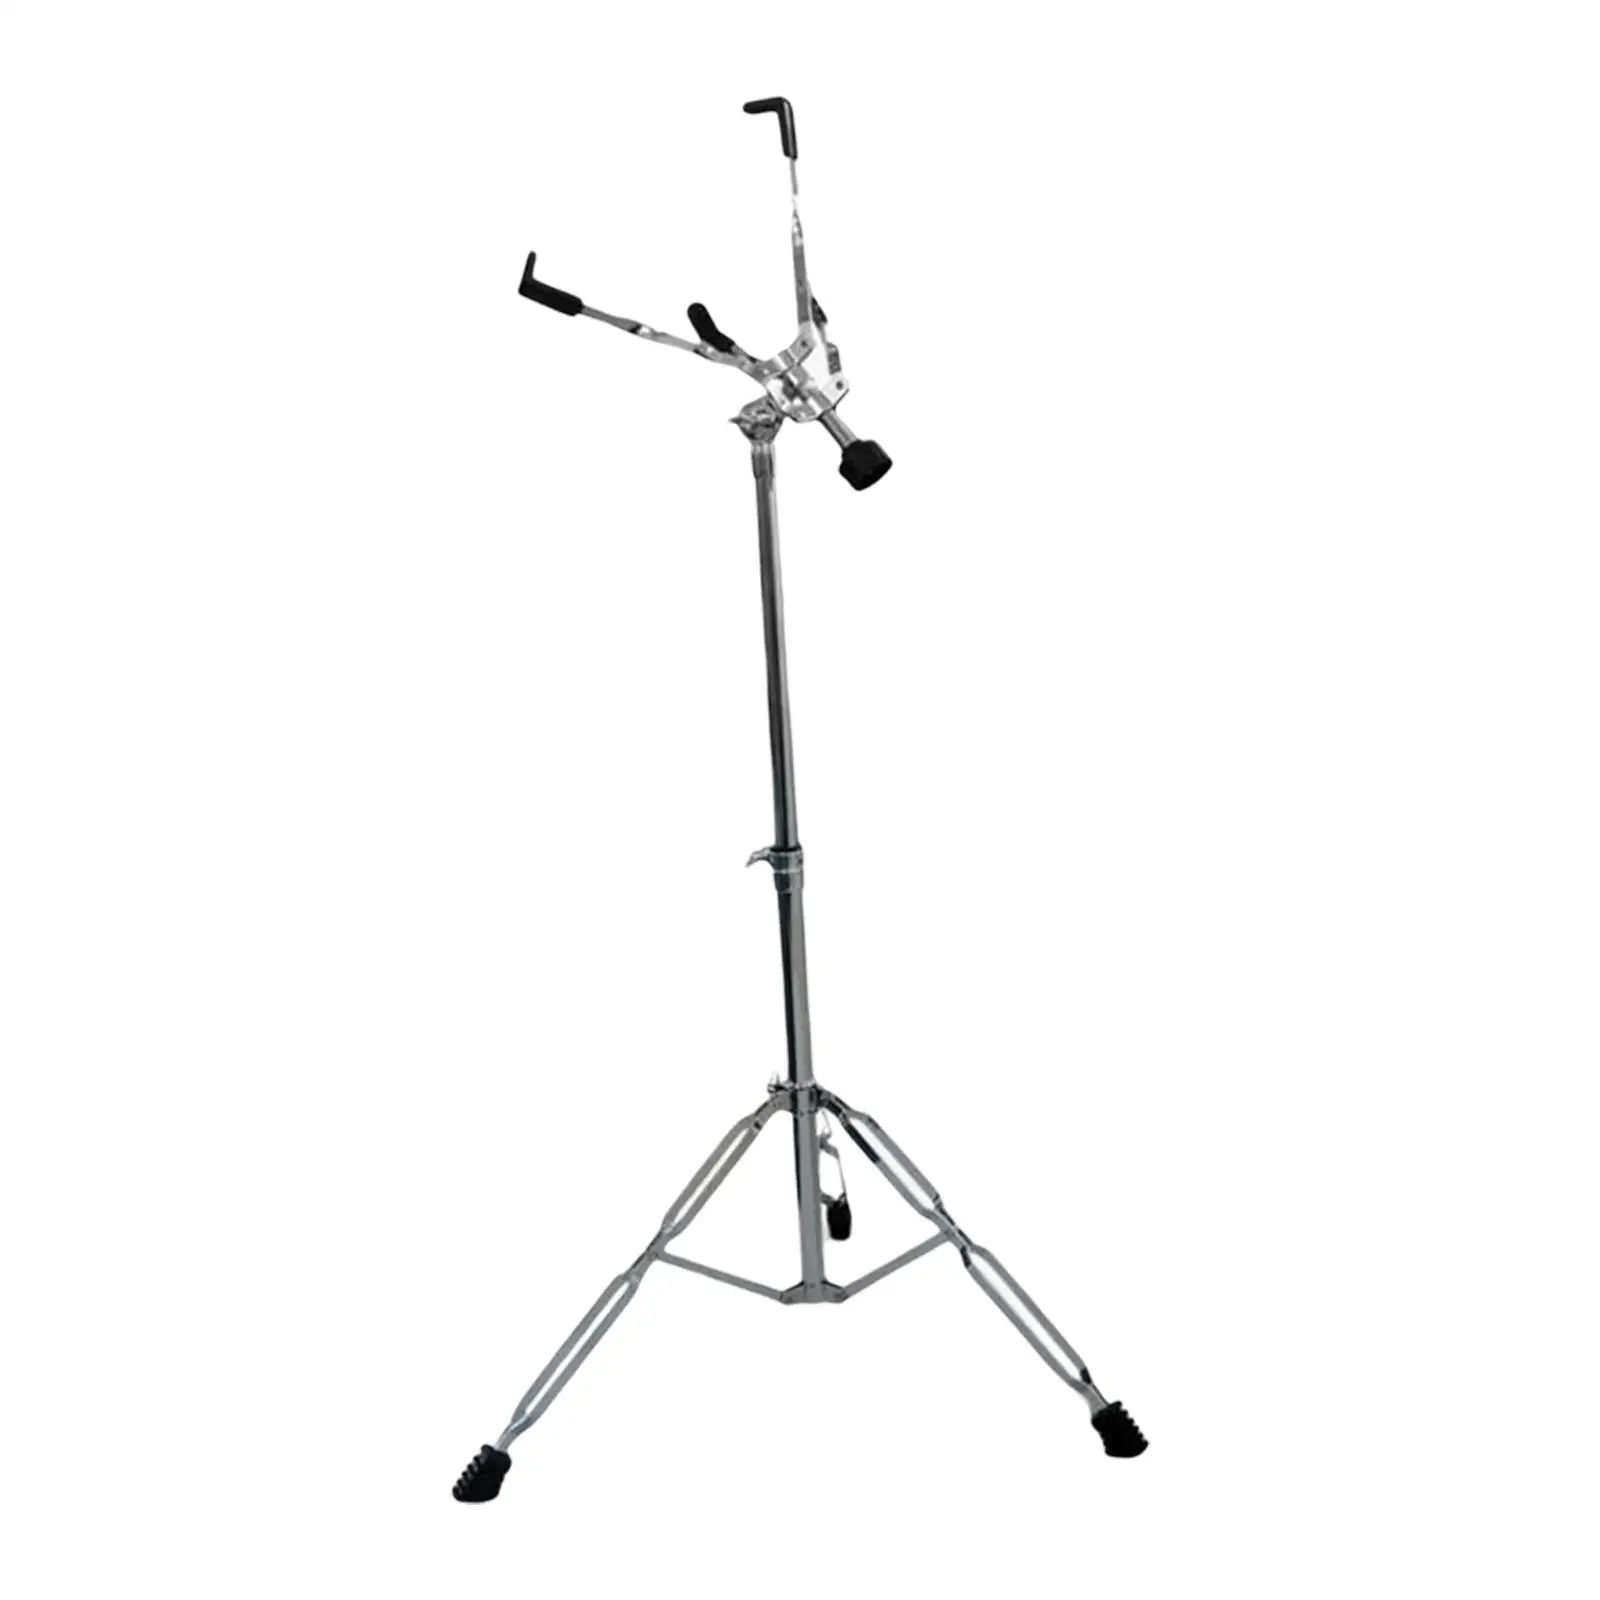 Portable Snare Drum Stand Height Adjust Drum Bracket Double Braced for Accessory